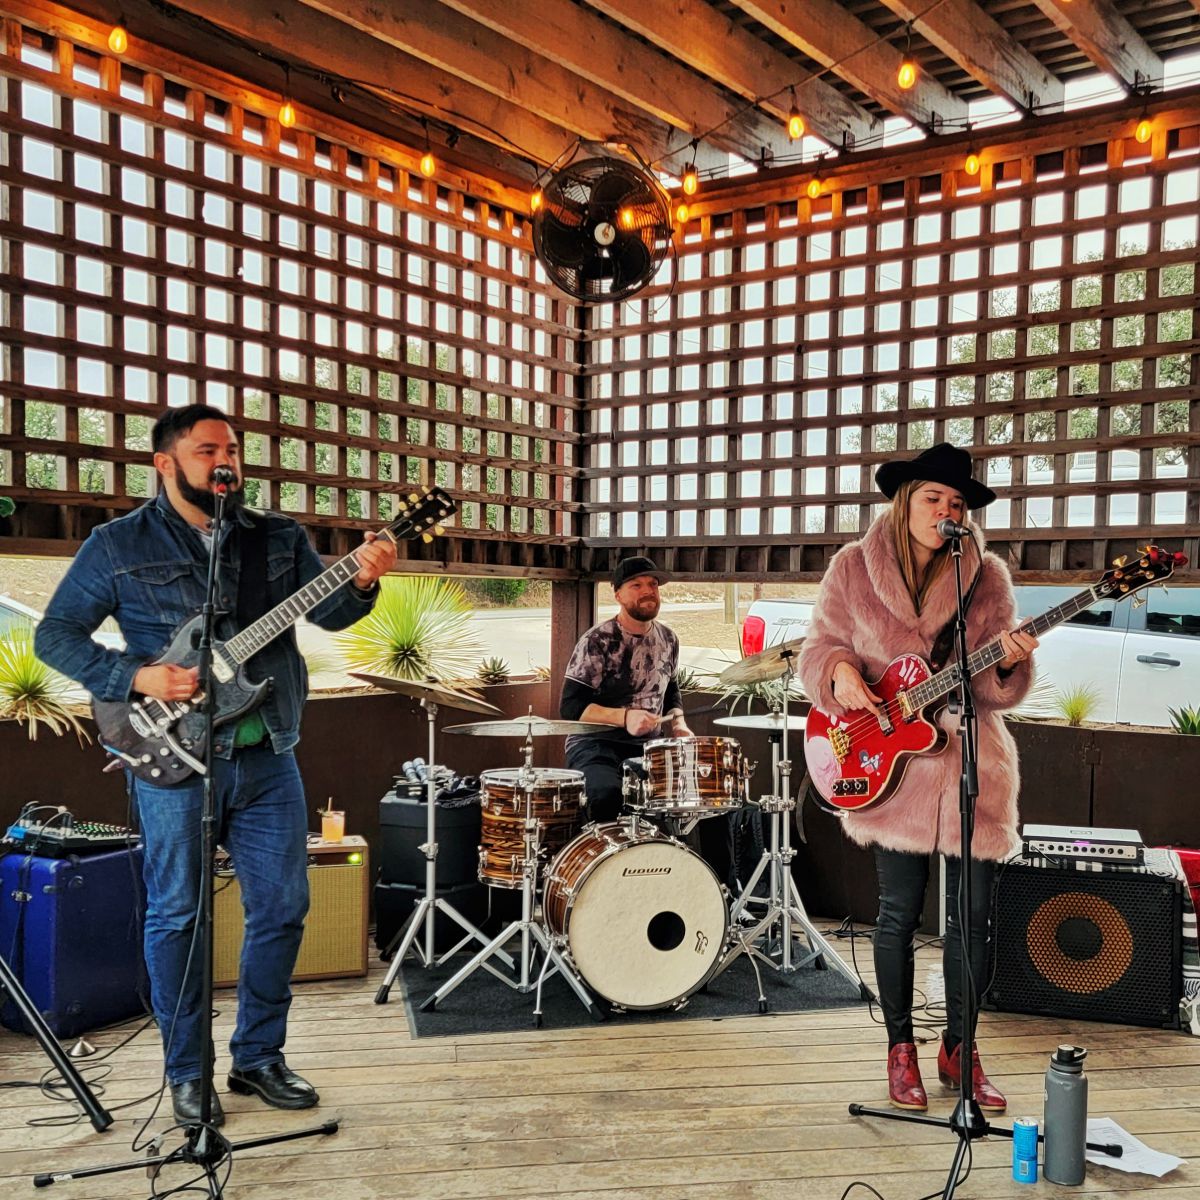 3 piece blues band onstage at distillery